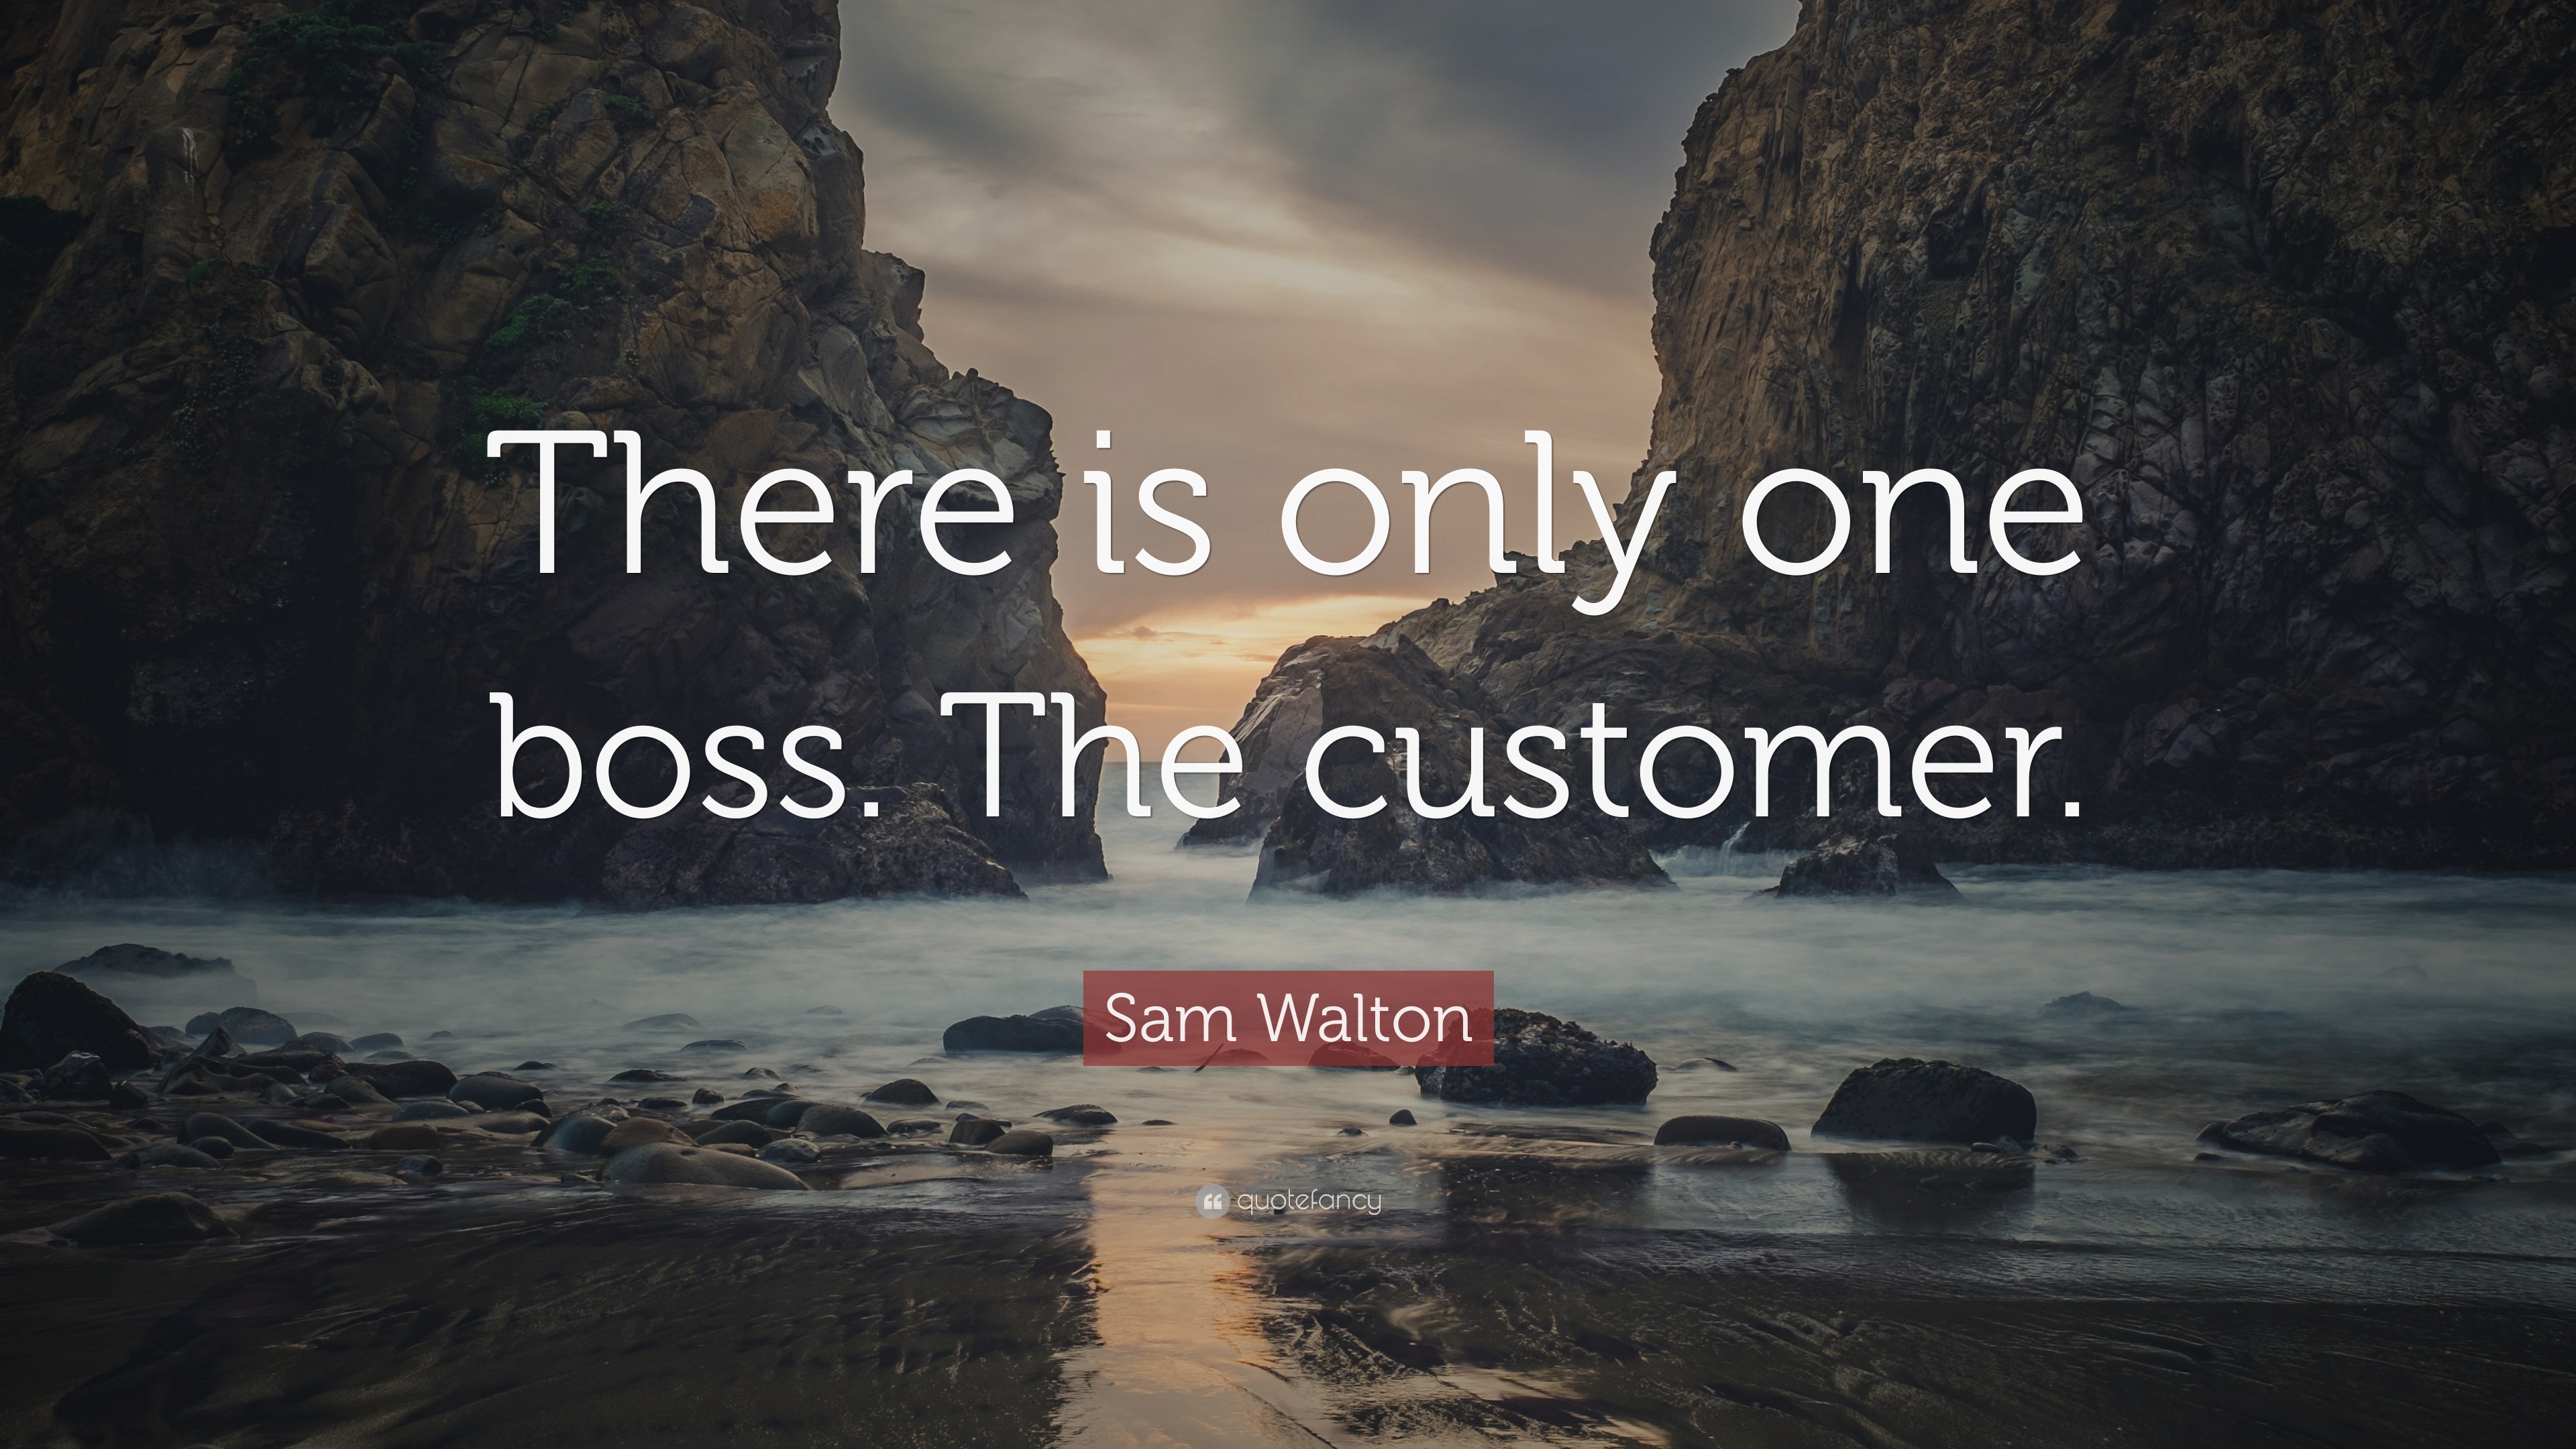 Sam Walton Quote: “There is only one The customer.”